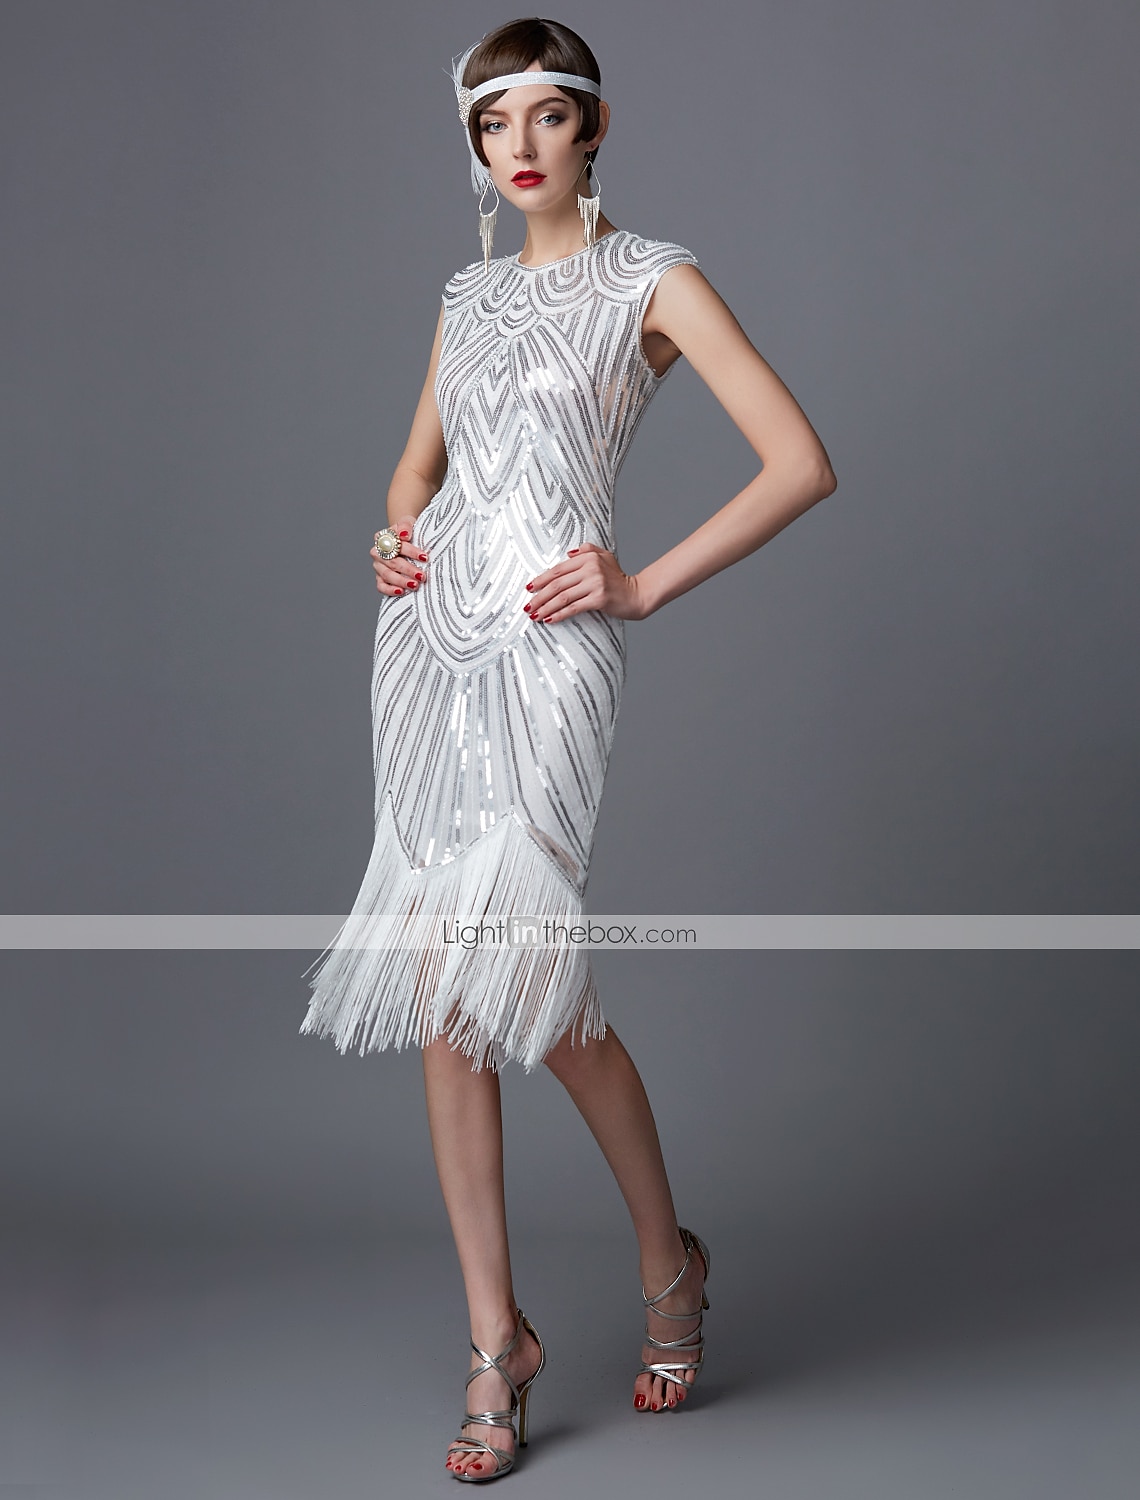 the great gatsby themed prom dresses